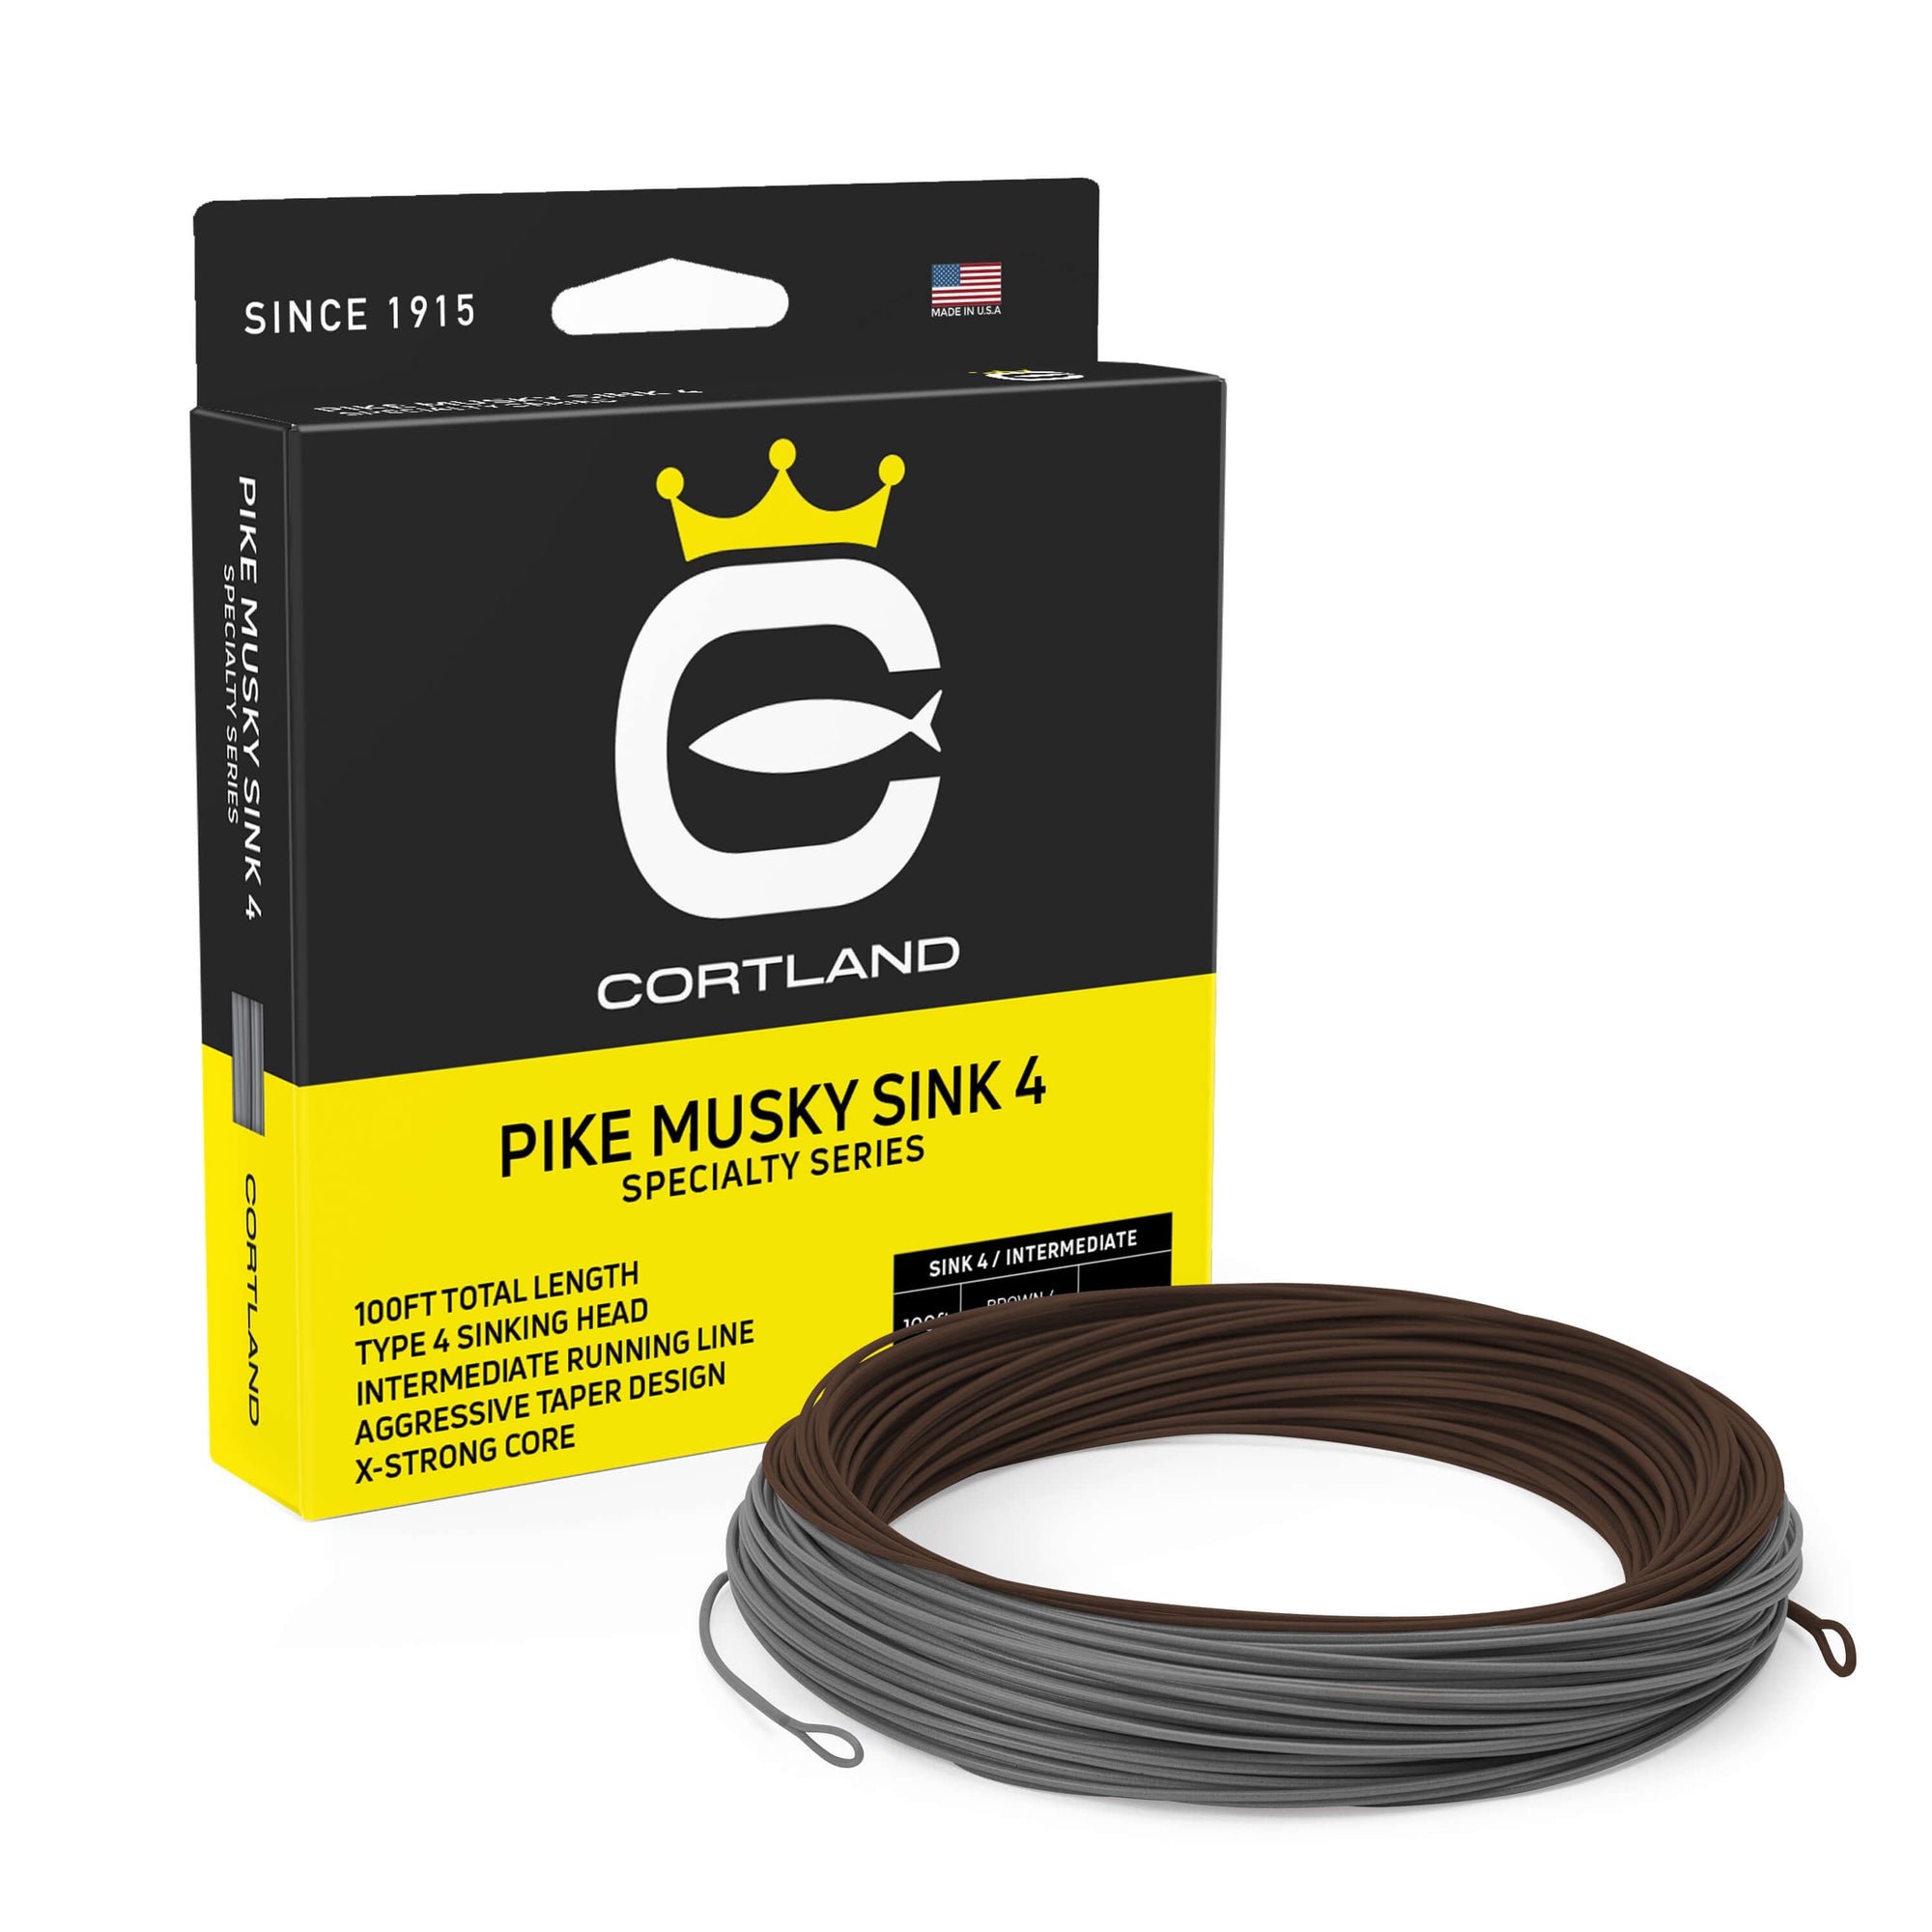 Pike Musky Sink 4 Fly Line Box and Coil. The coil is brown and gray. The box has the Cortland logo and is black and yellow.